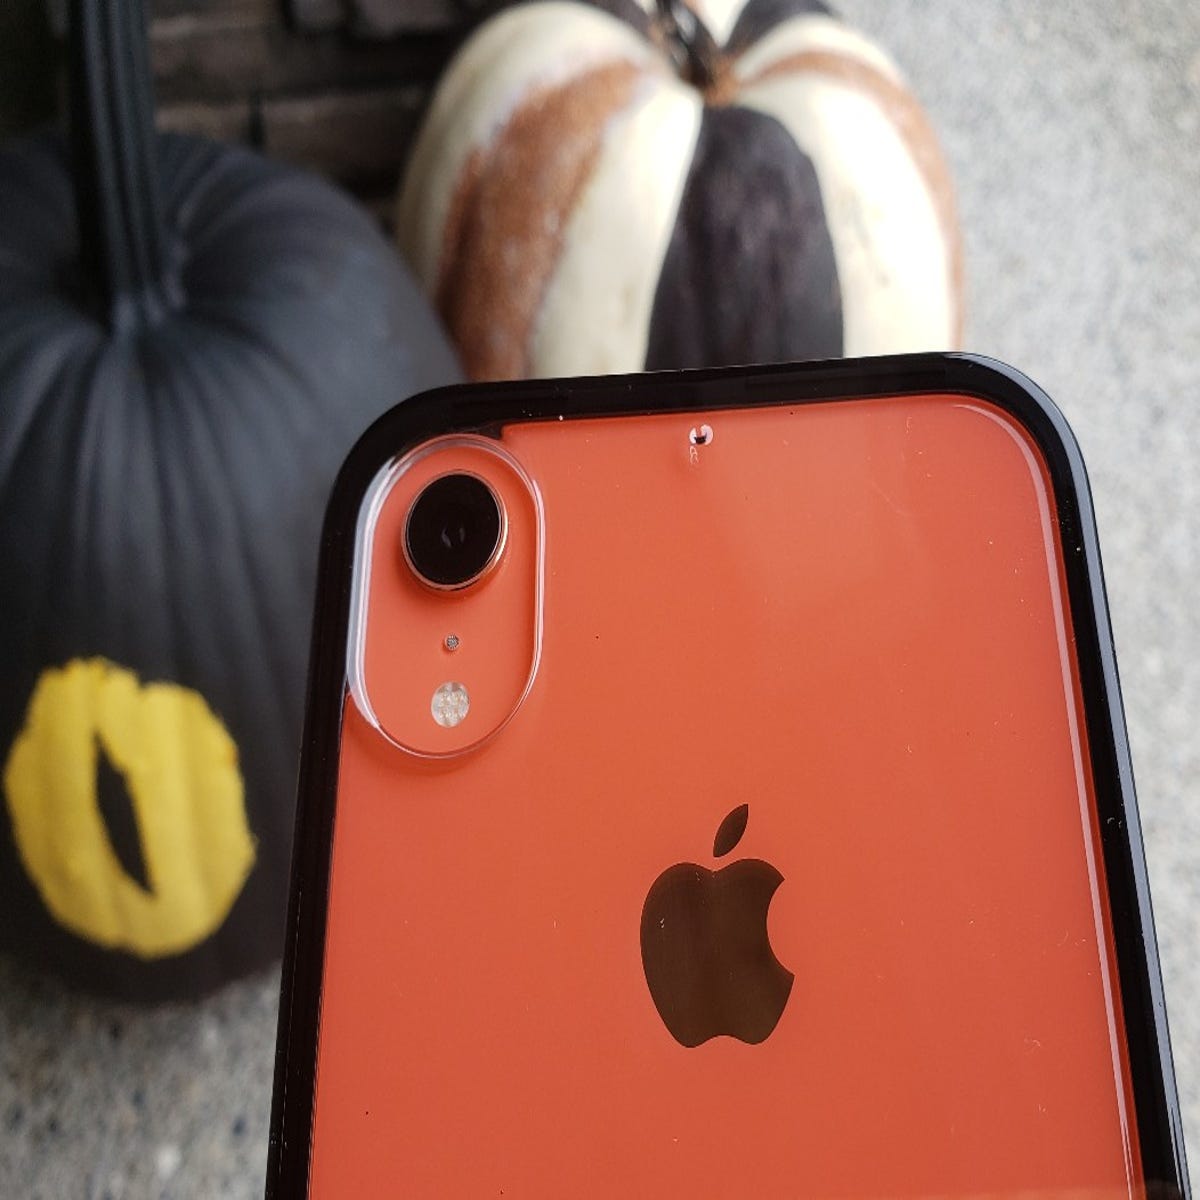 Puregear Cases For Apple Iphone Xr Clear Cases Show Off The Bright Colors Protect The Iphone Zdnet